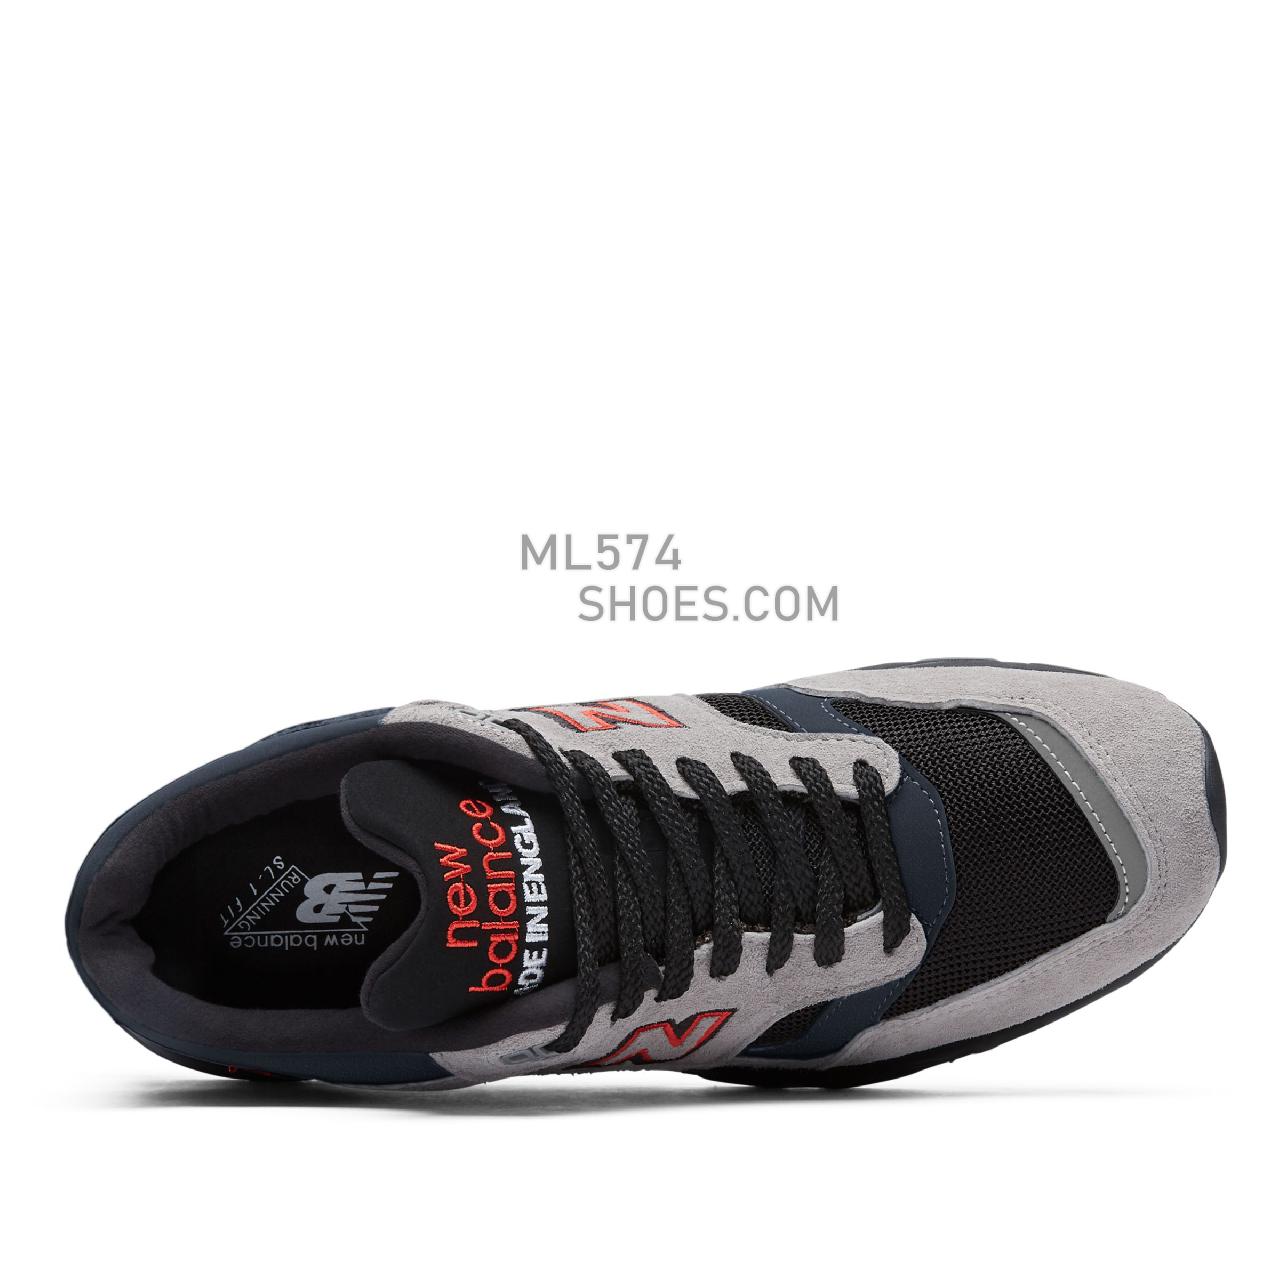 New Balance Made in UK 1530 - Men's Made in UK 1530 - Grey with Black and Red - M1530VA